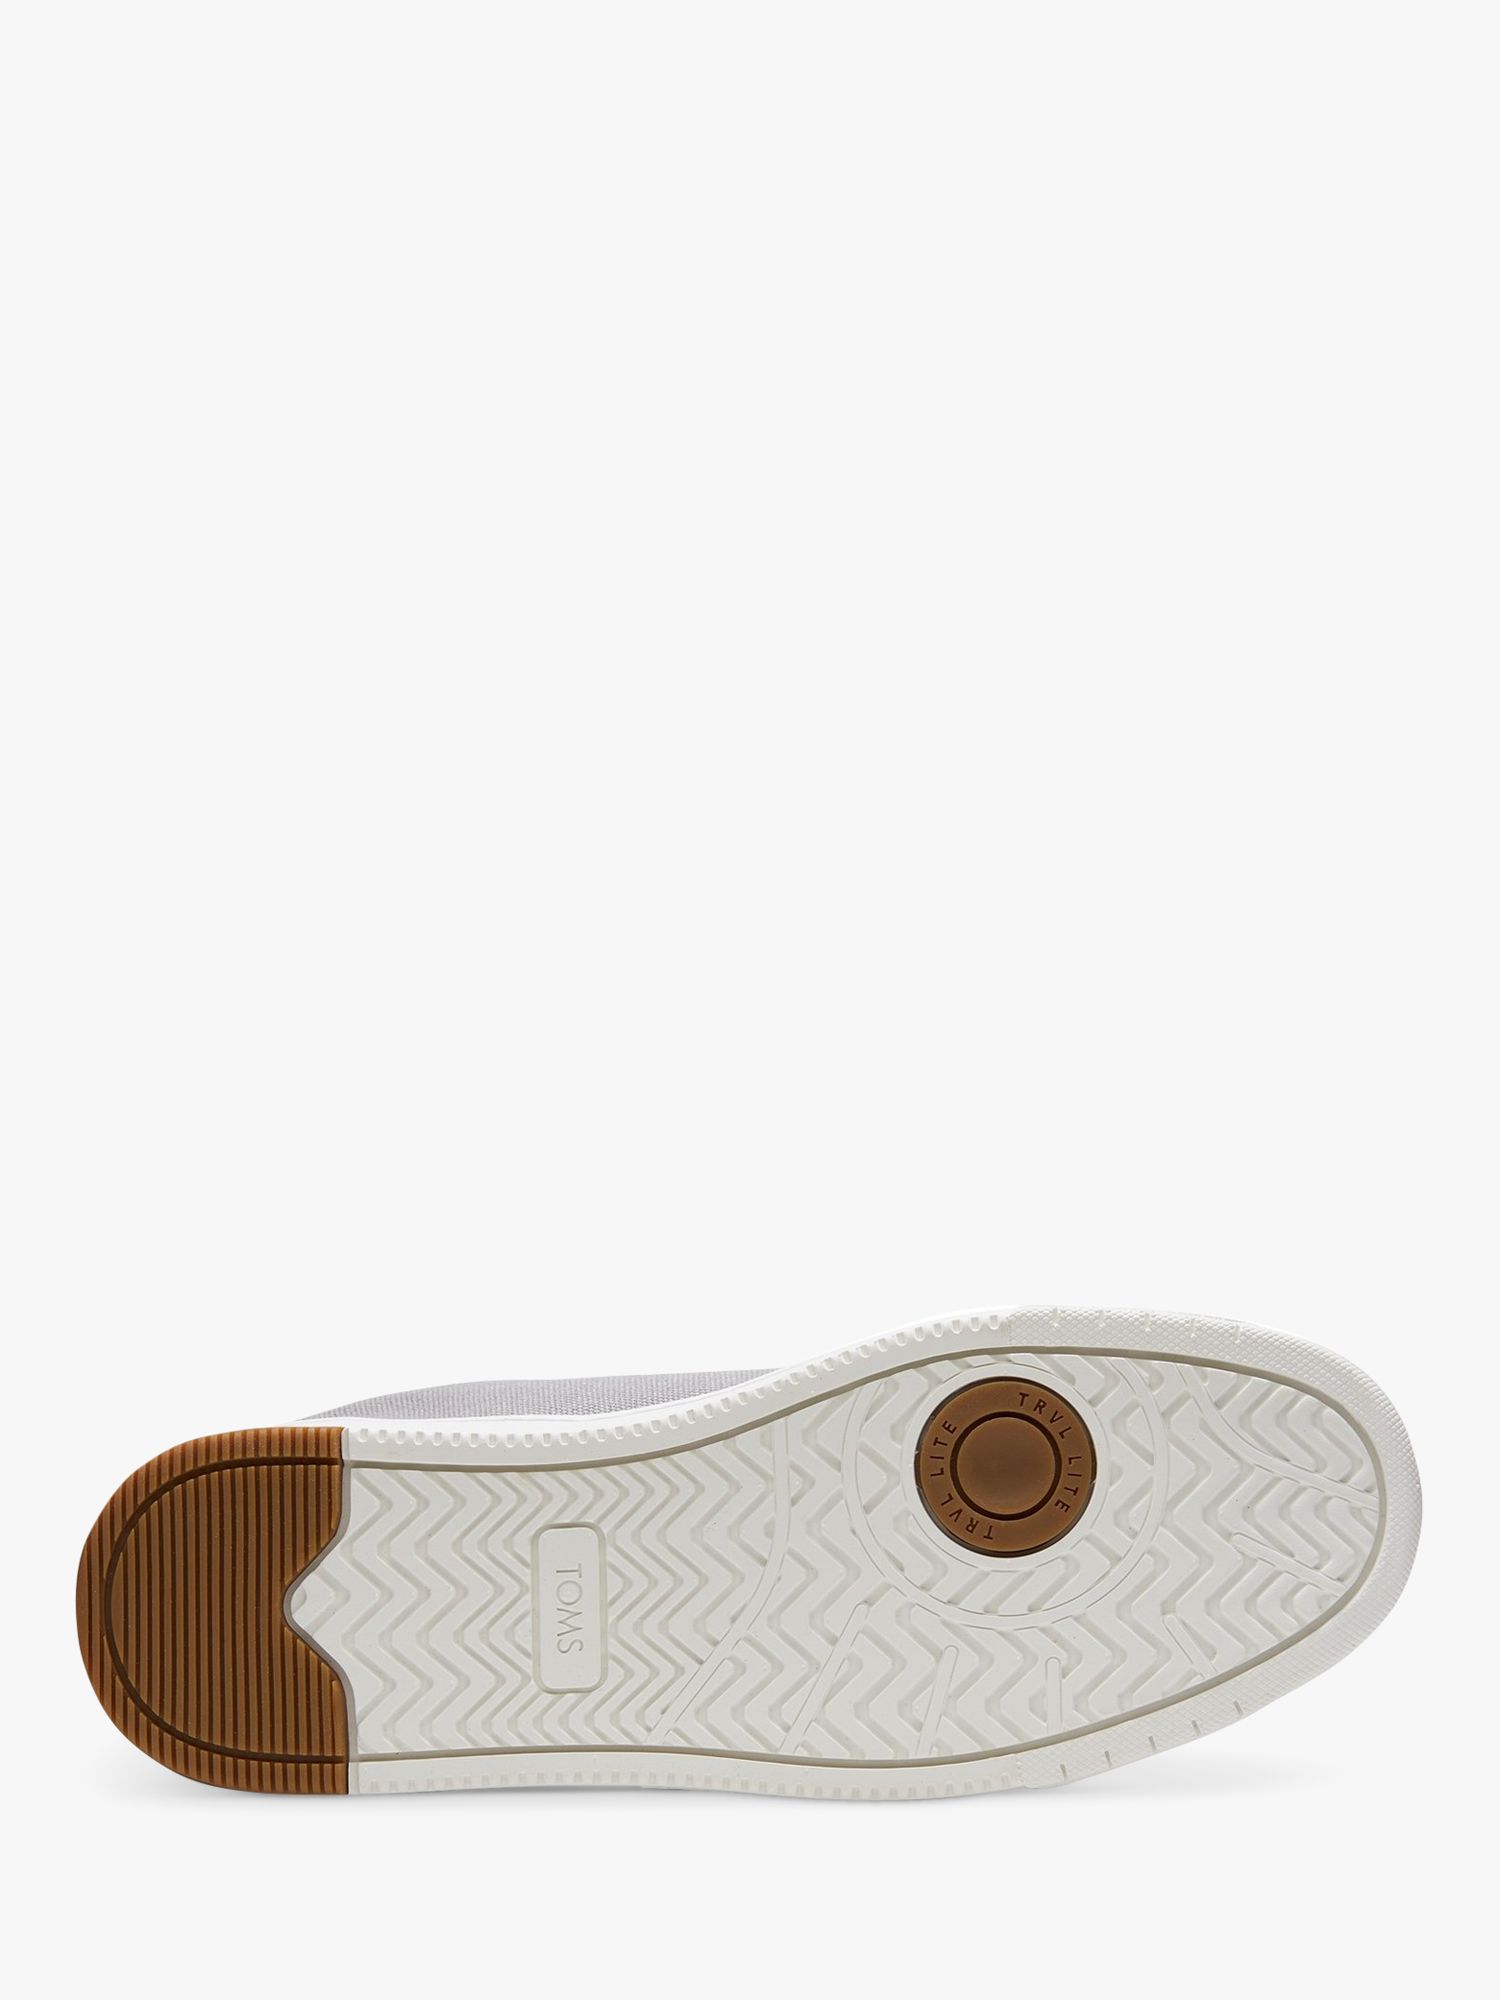 Buy TOMS Travel Lite 2.0 Low Trainers, Grey Online at johnlewis.com